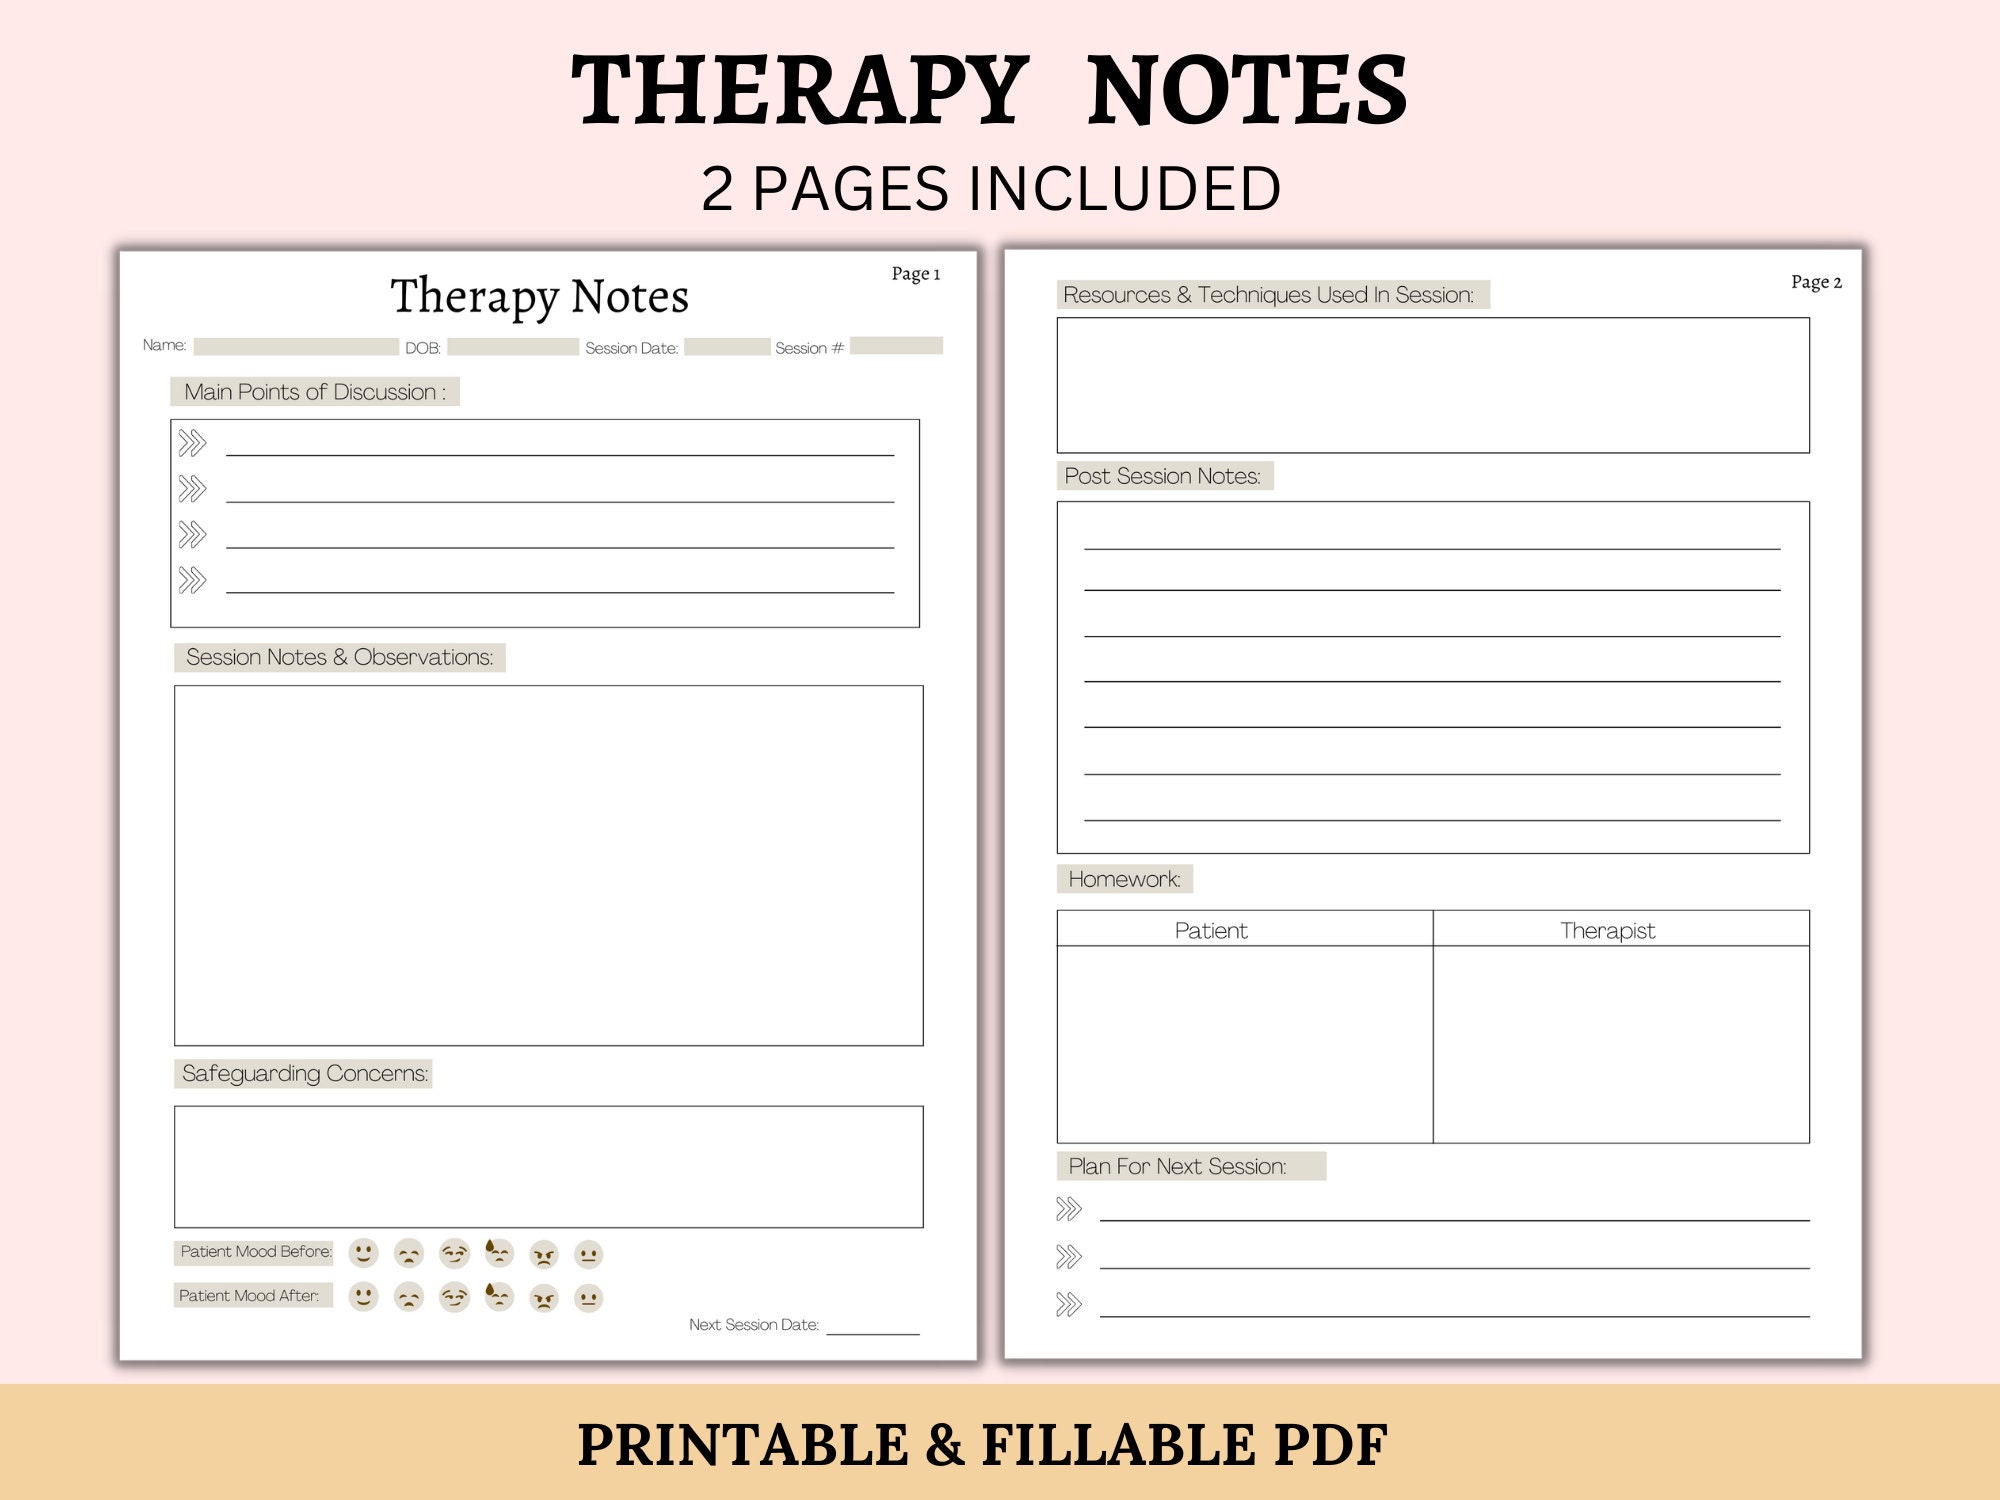 homework for clients in therapy